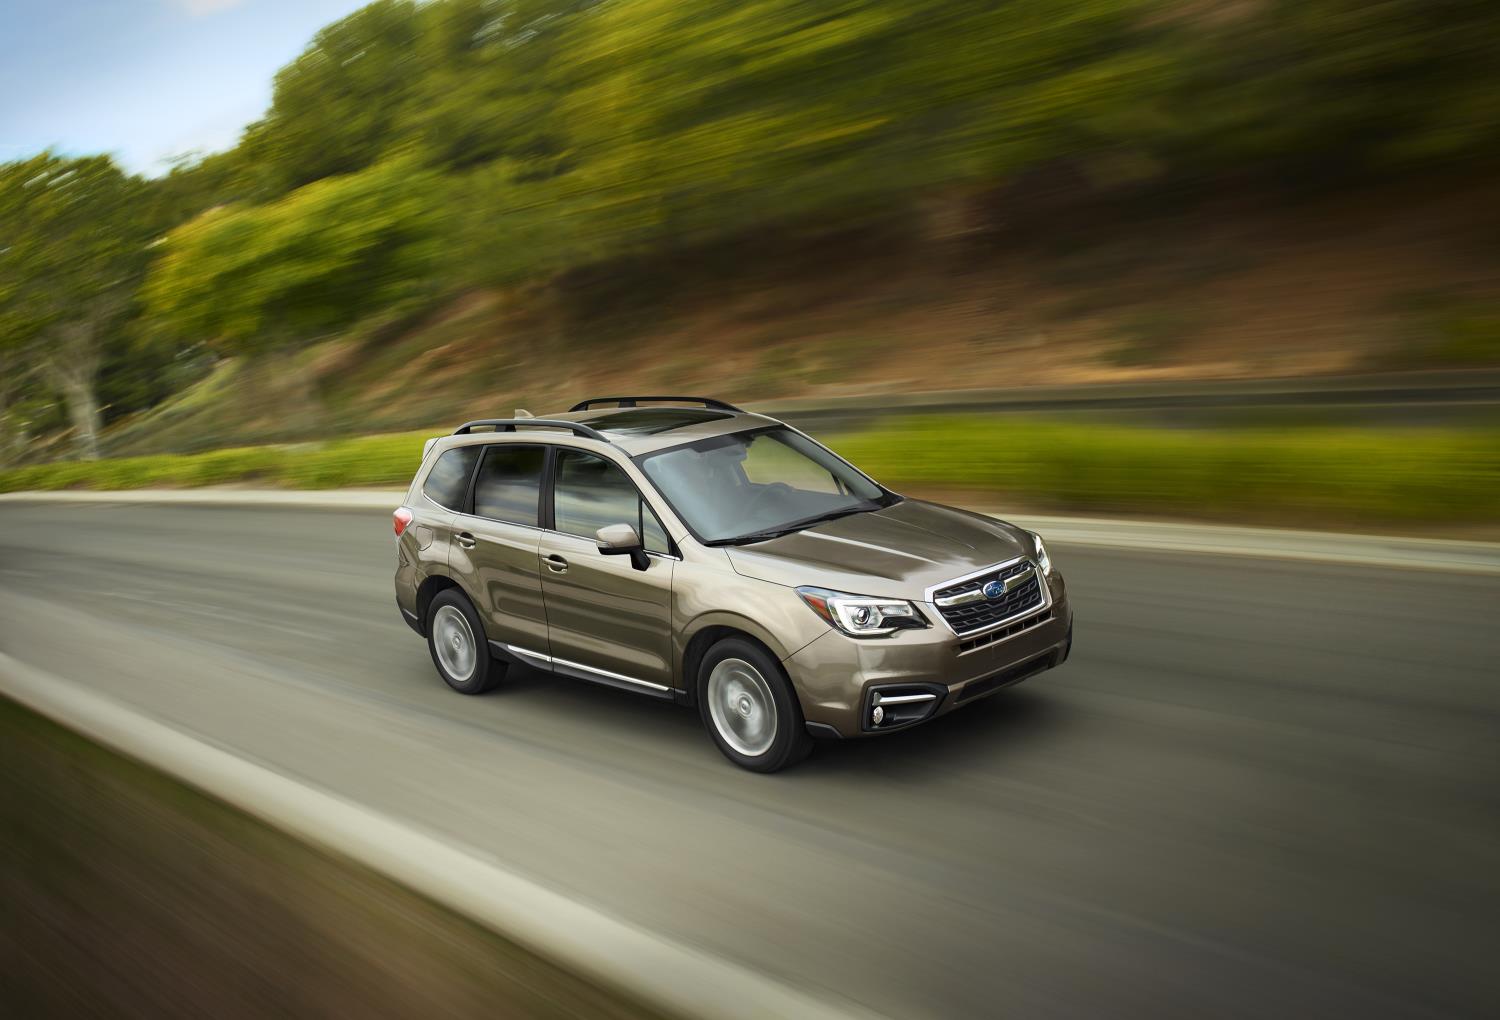 2017 Subaru Forester Unveiled, Comes with More Tech and Improved Fuel ...